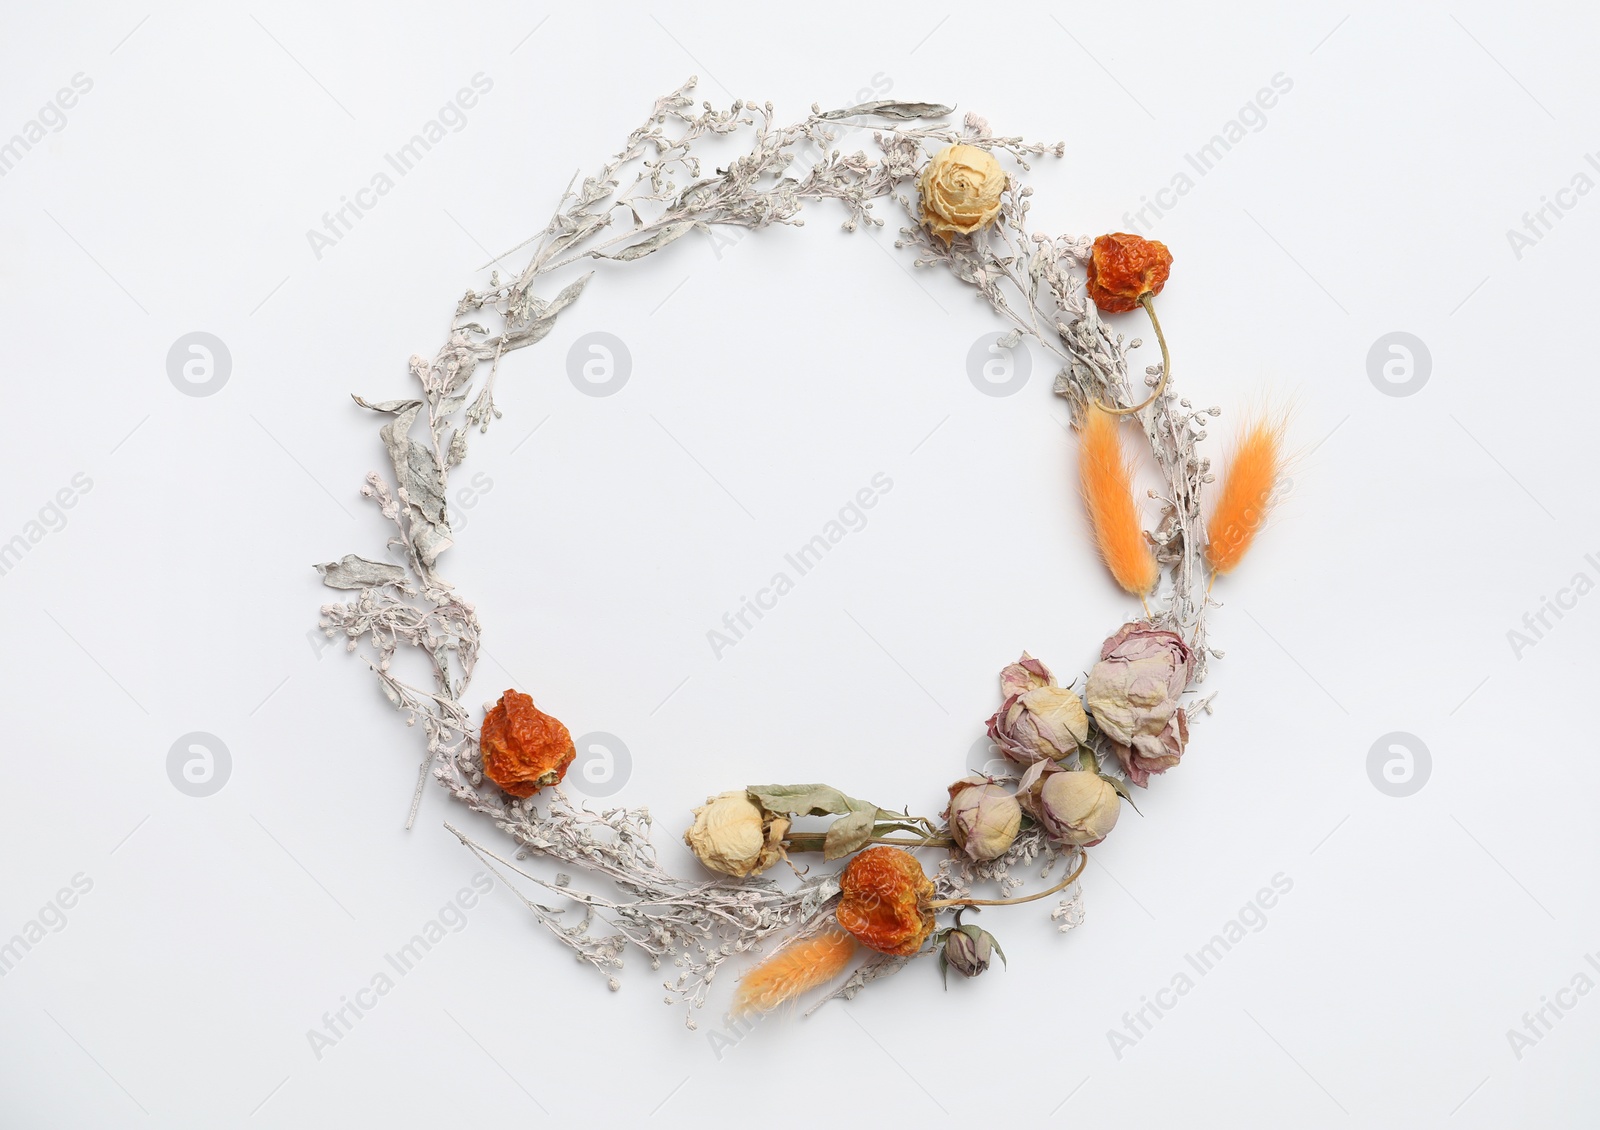 Photo of Dried flowers, leaves and spikes arranged in shape of wreath on white background, flat lay with space for text. Autumnal aesthetic